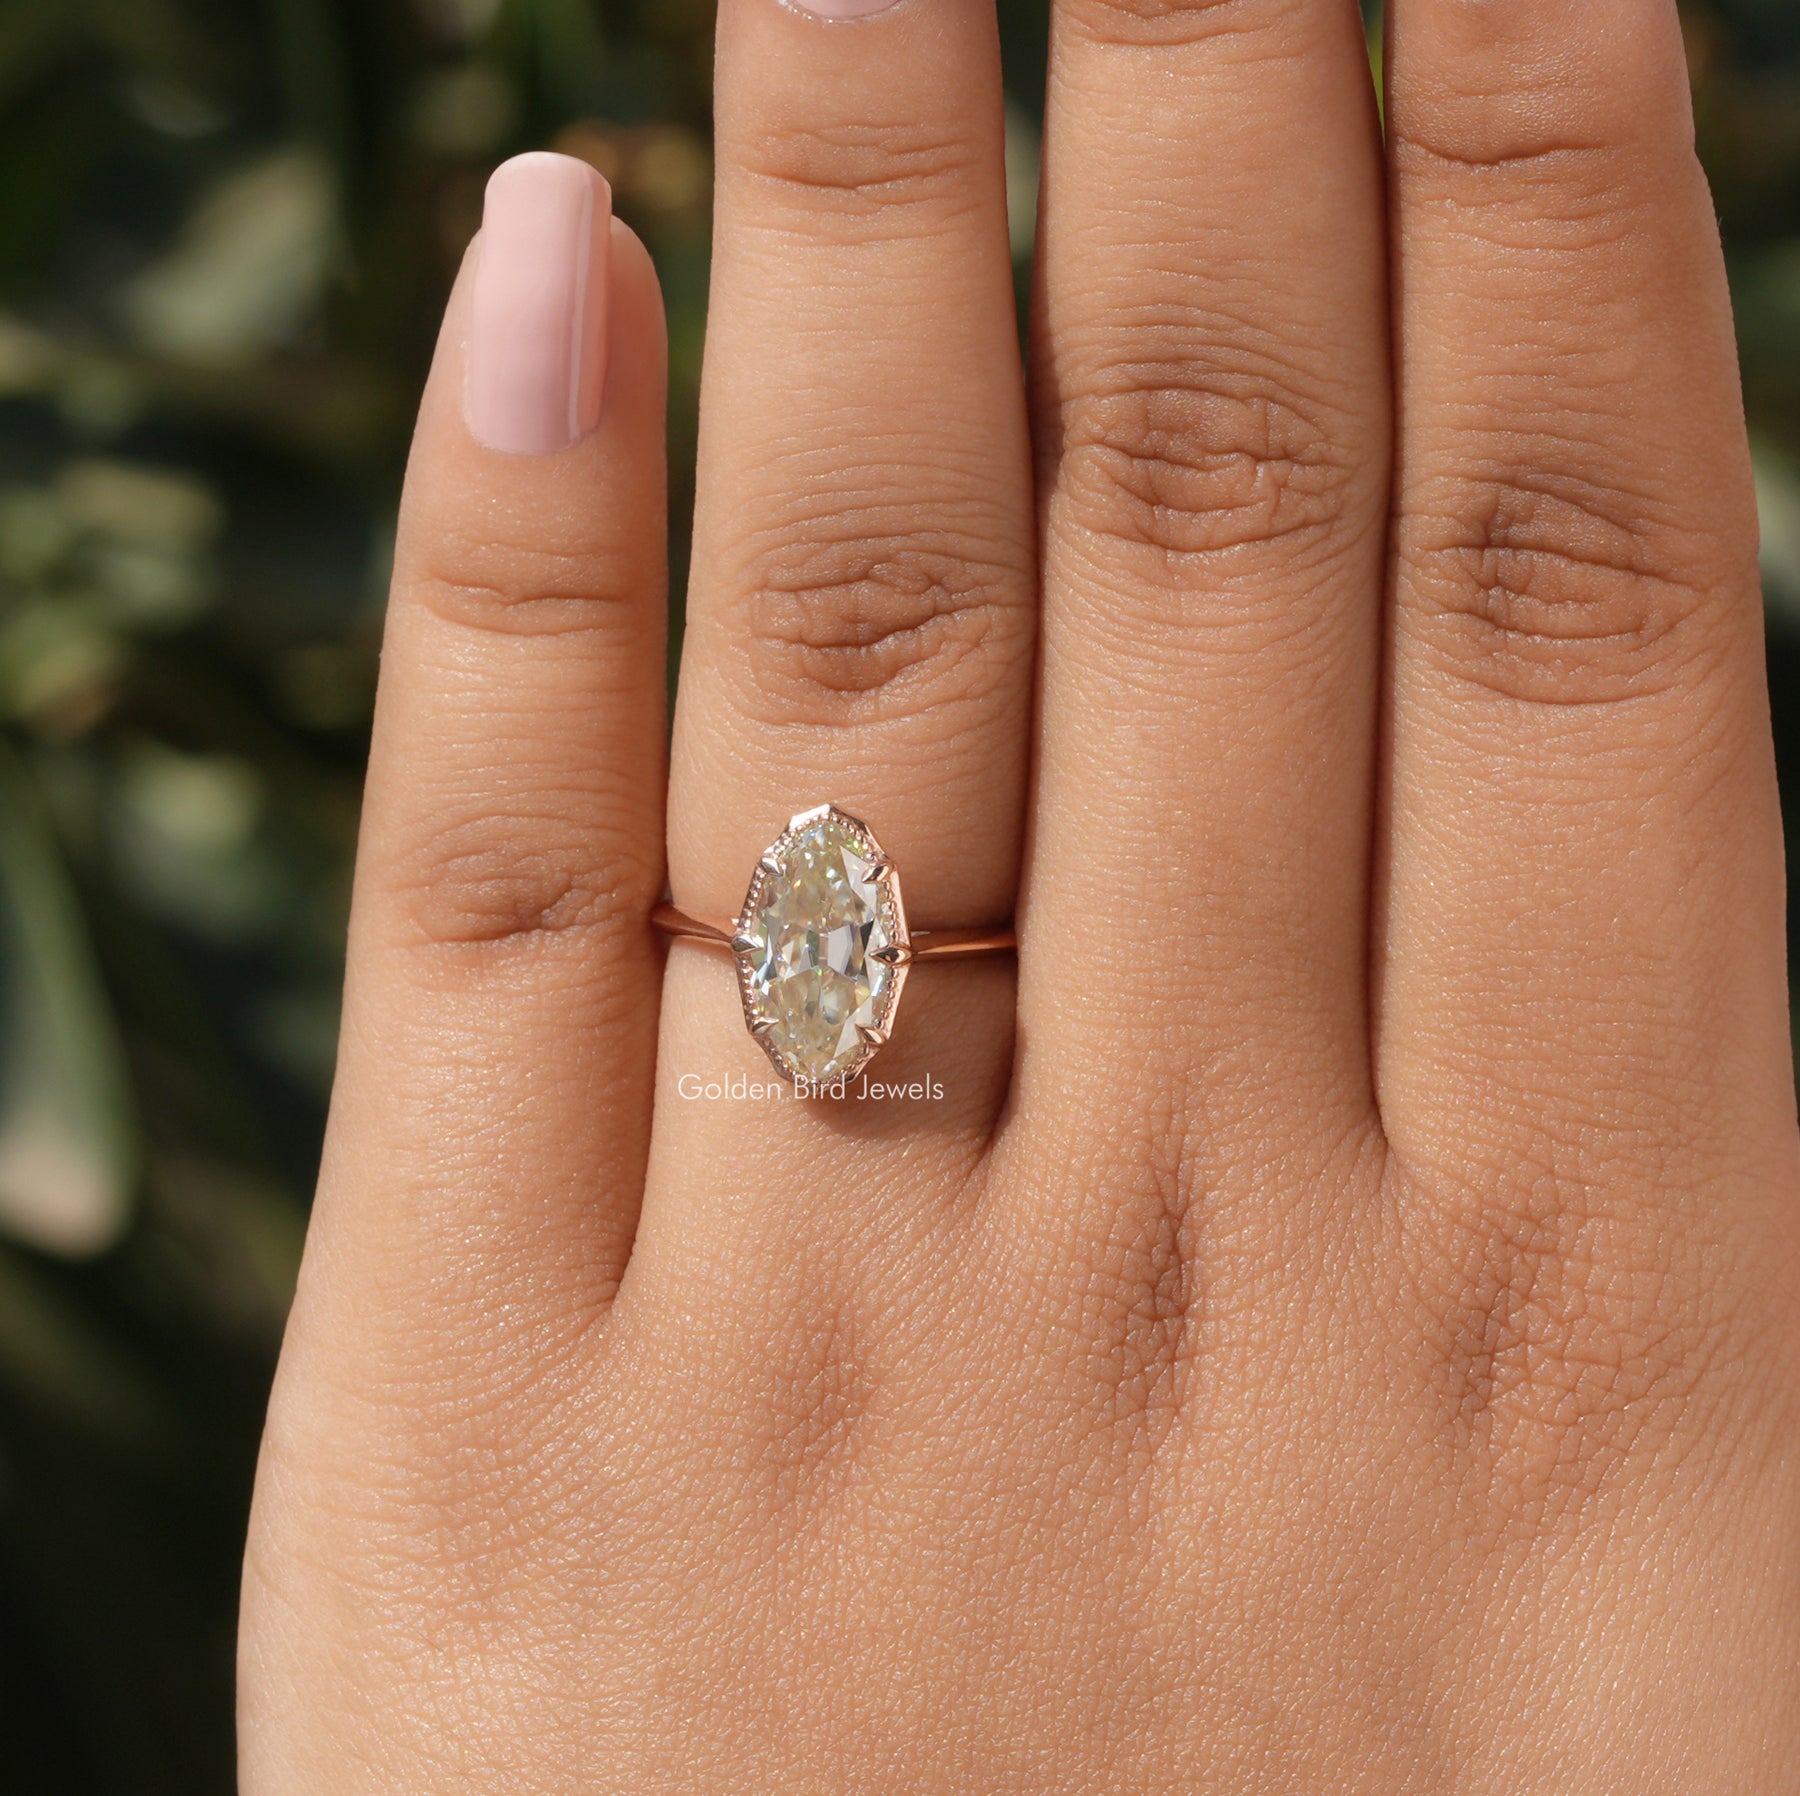 [In finger front view of moval cut solitaire ring made of VS clarity]-[Golden Bird Jewels]